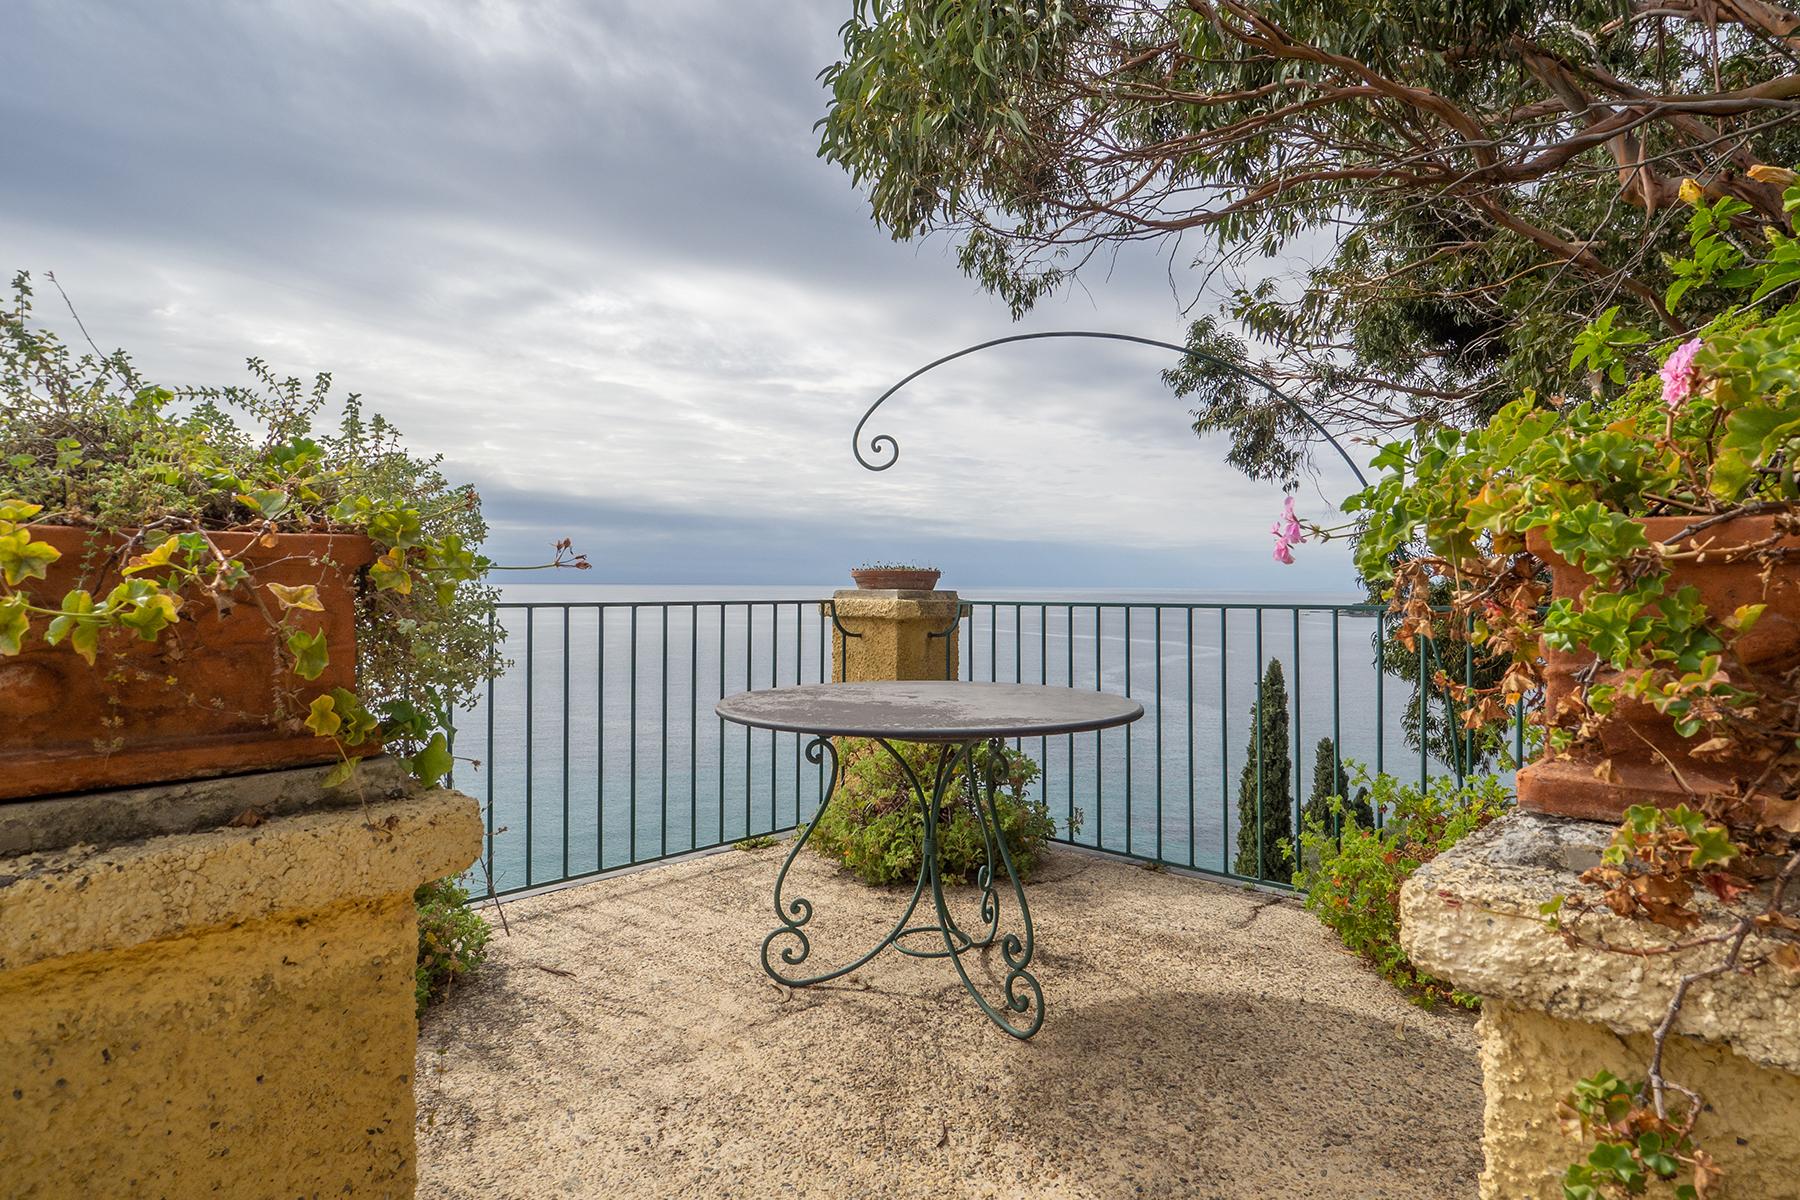 Semidetached historical villa with private access to the sea - 24